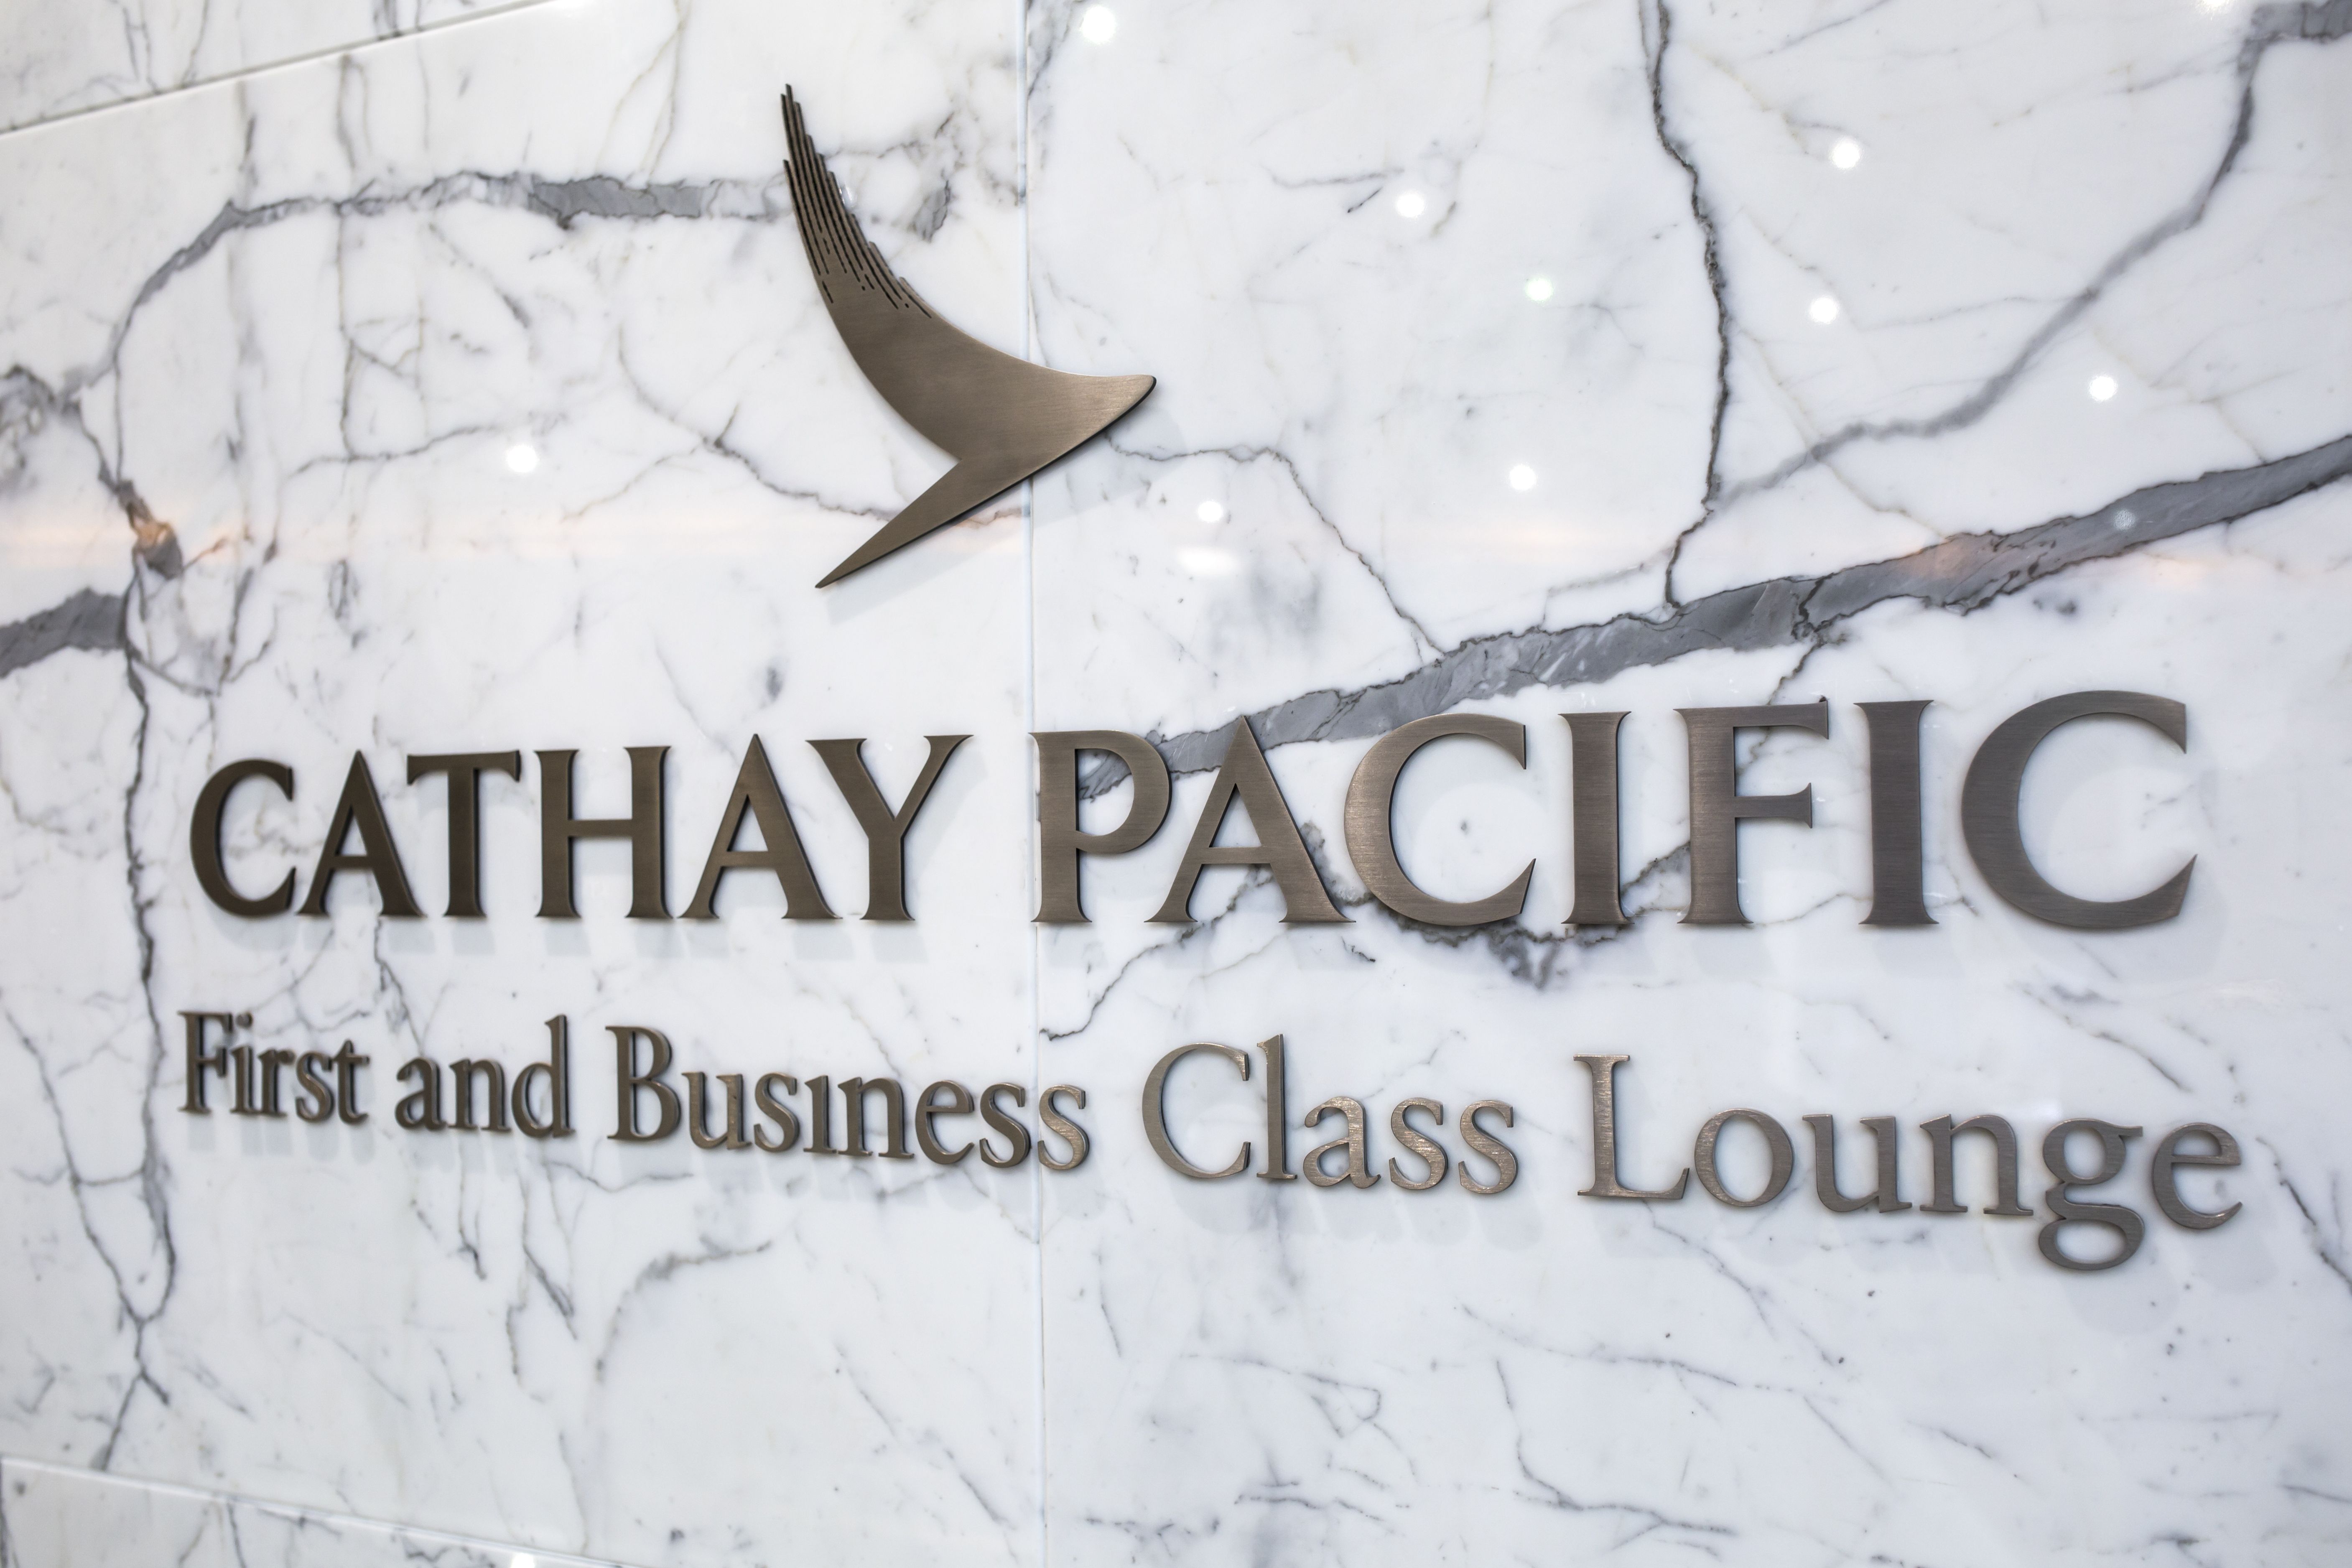 A sign just outside the Cathay Pacific First and Business class lounge.